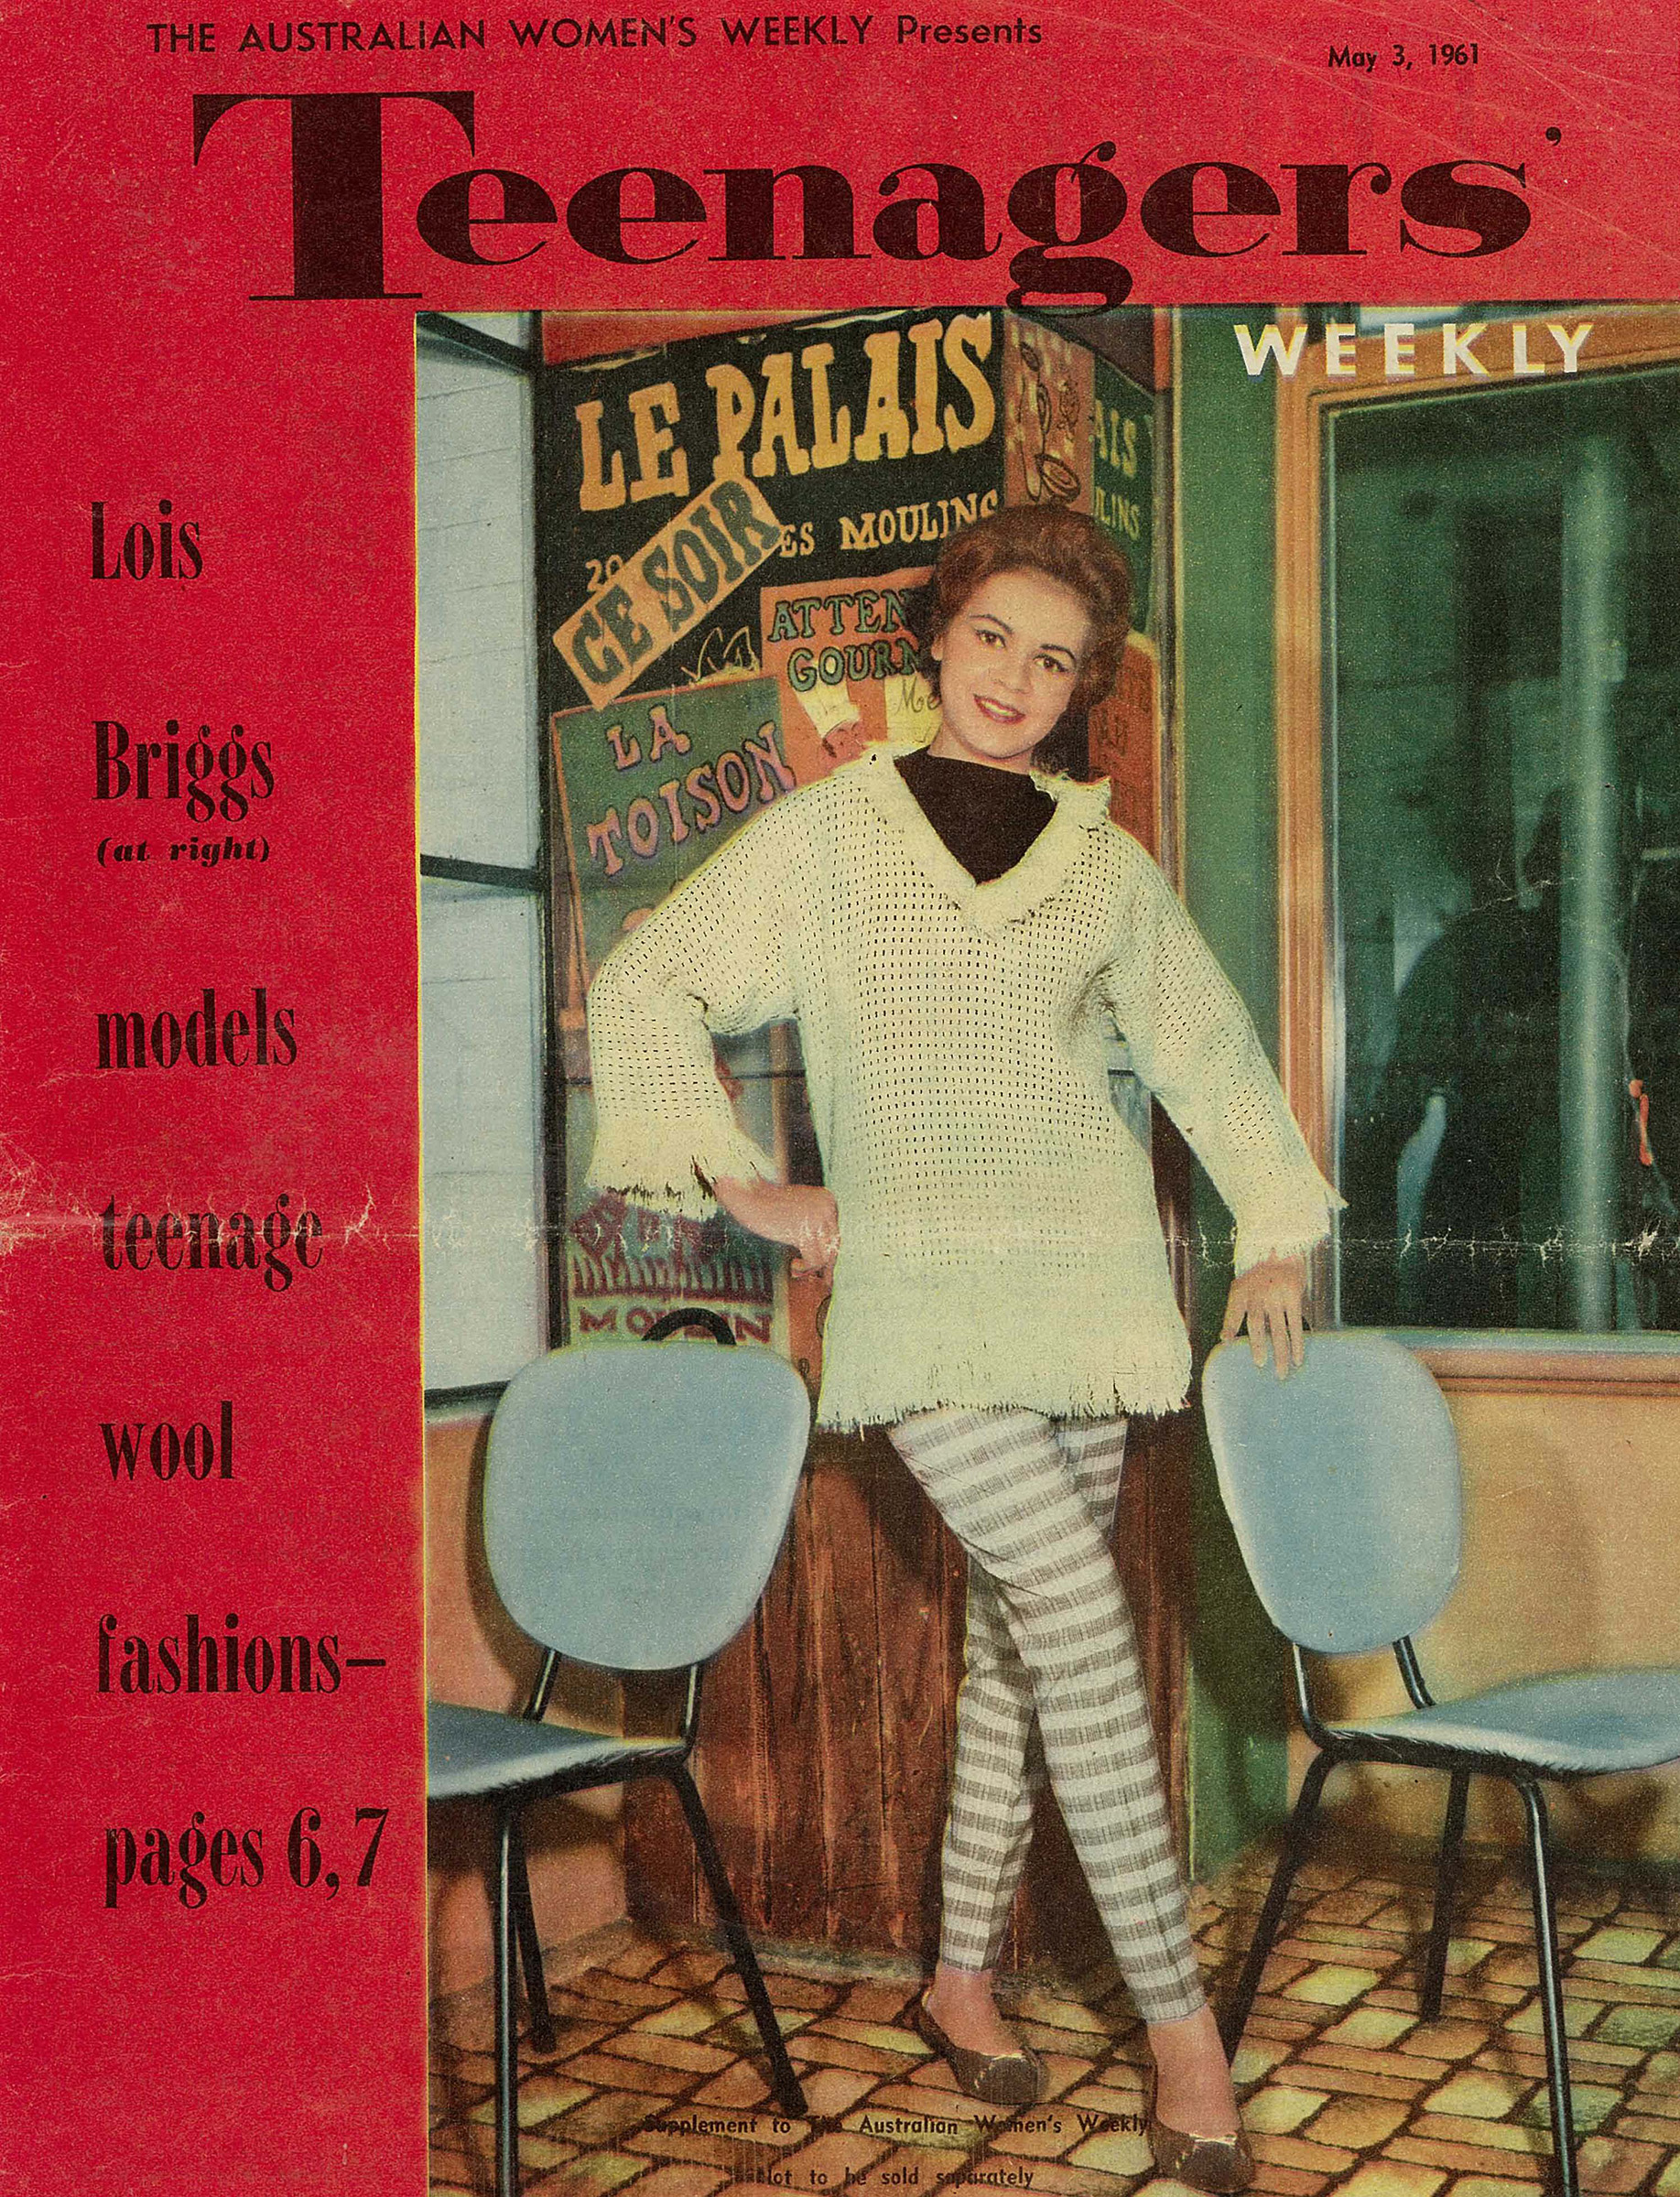 A vintage magazine cover of Teenage weekly with a young woman in 60s style wool clothes